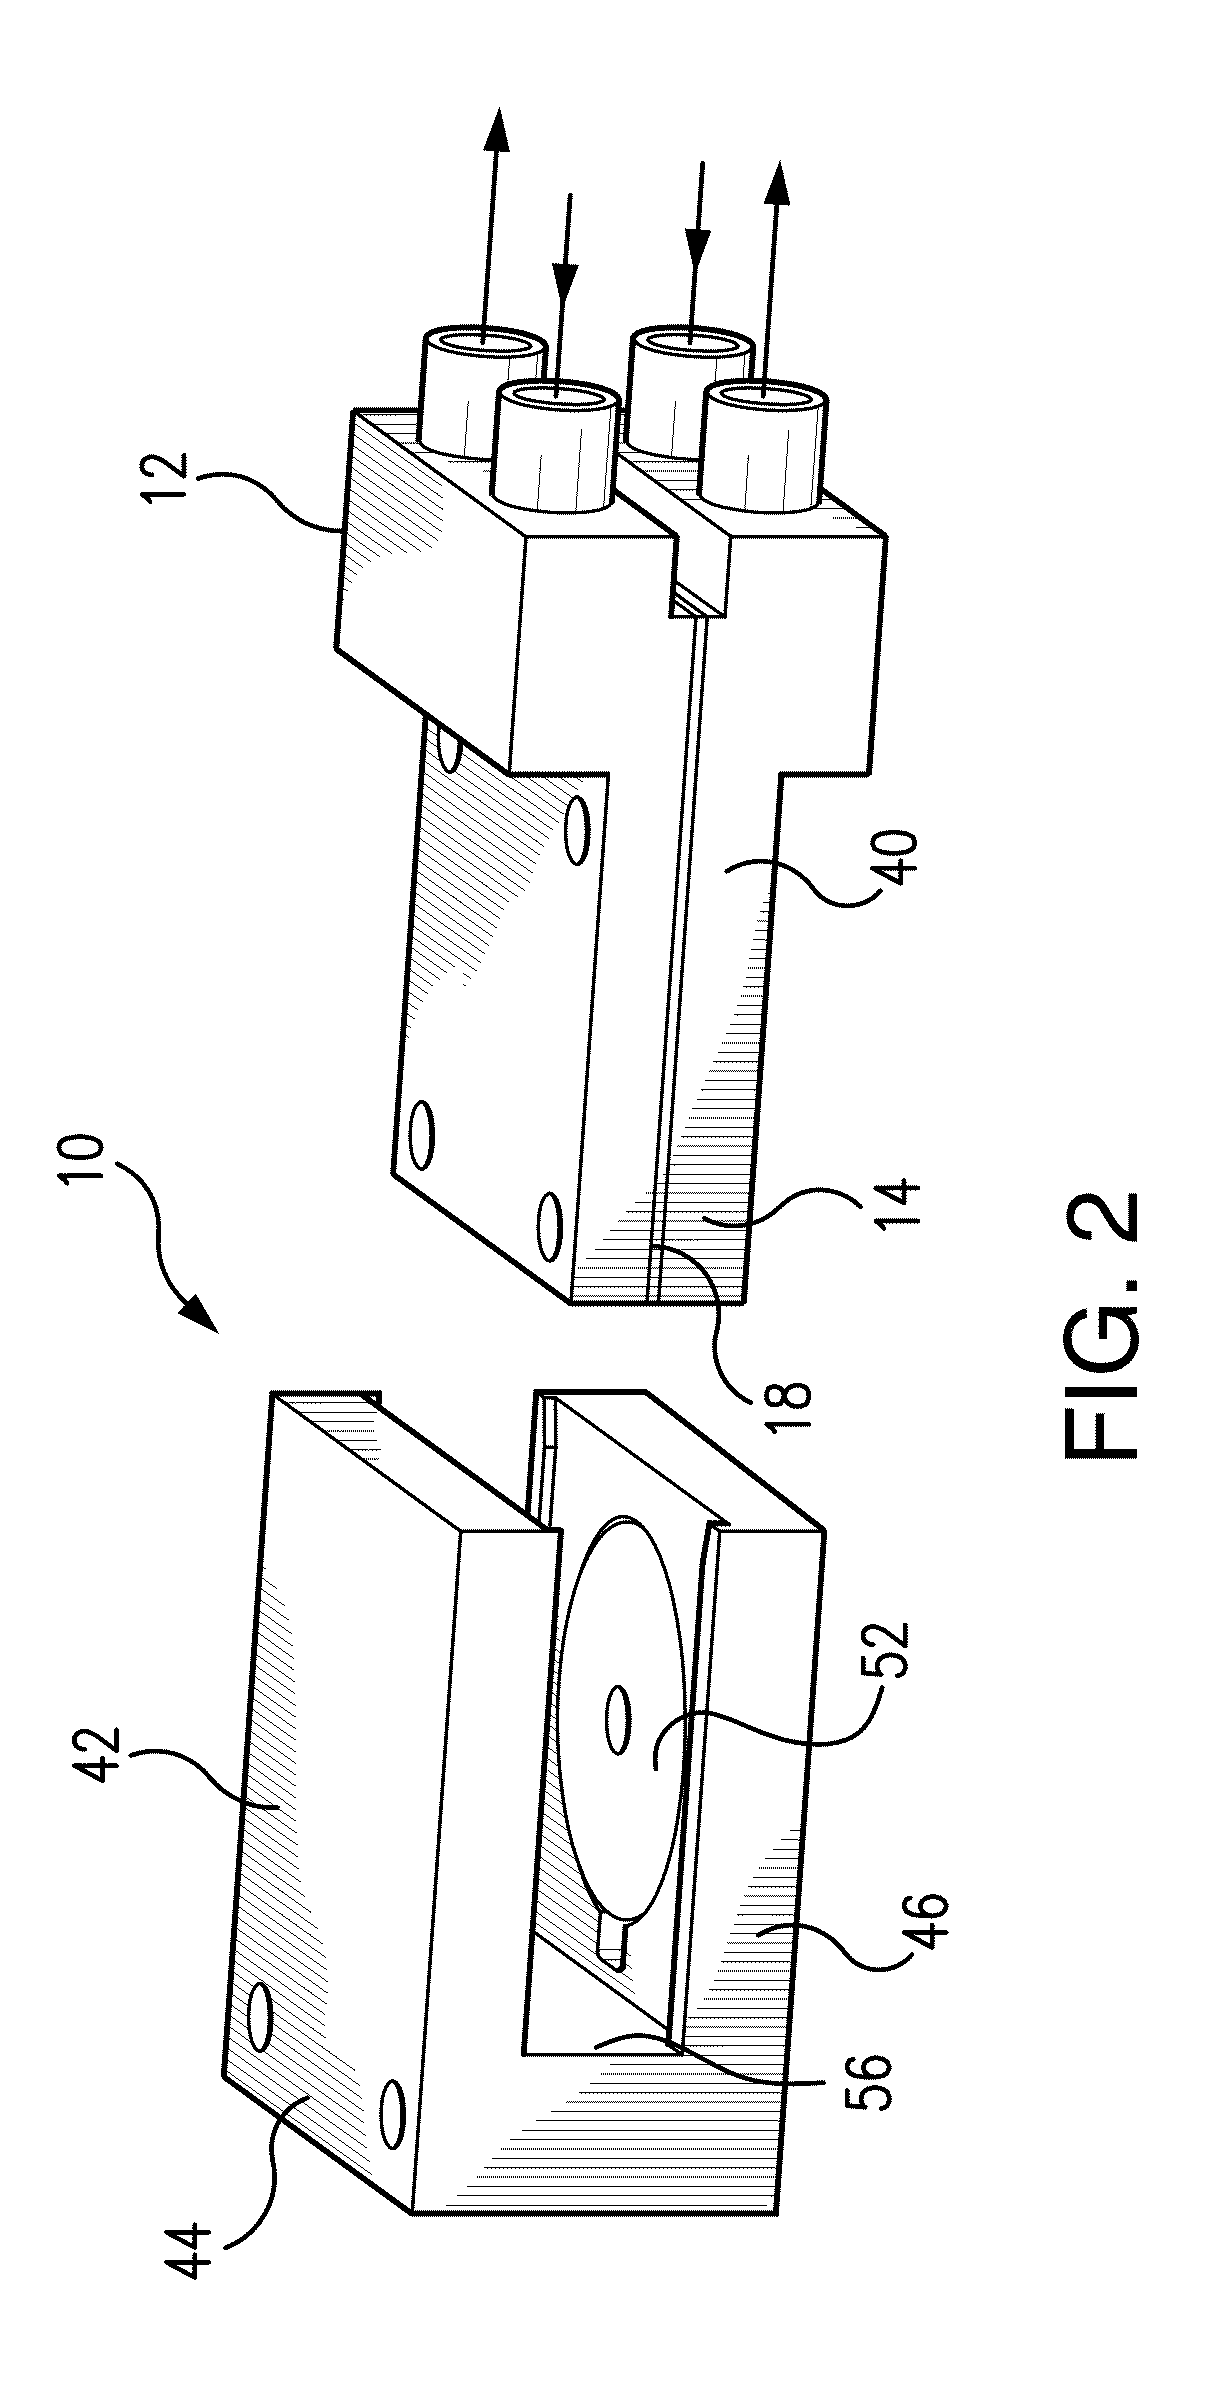 Mold for Making a Membrane for Use with a Flow Control System for a Micropump